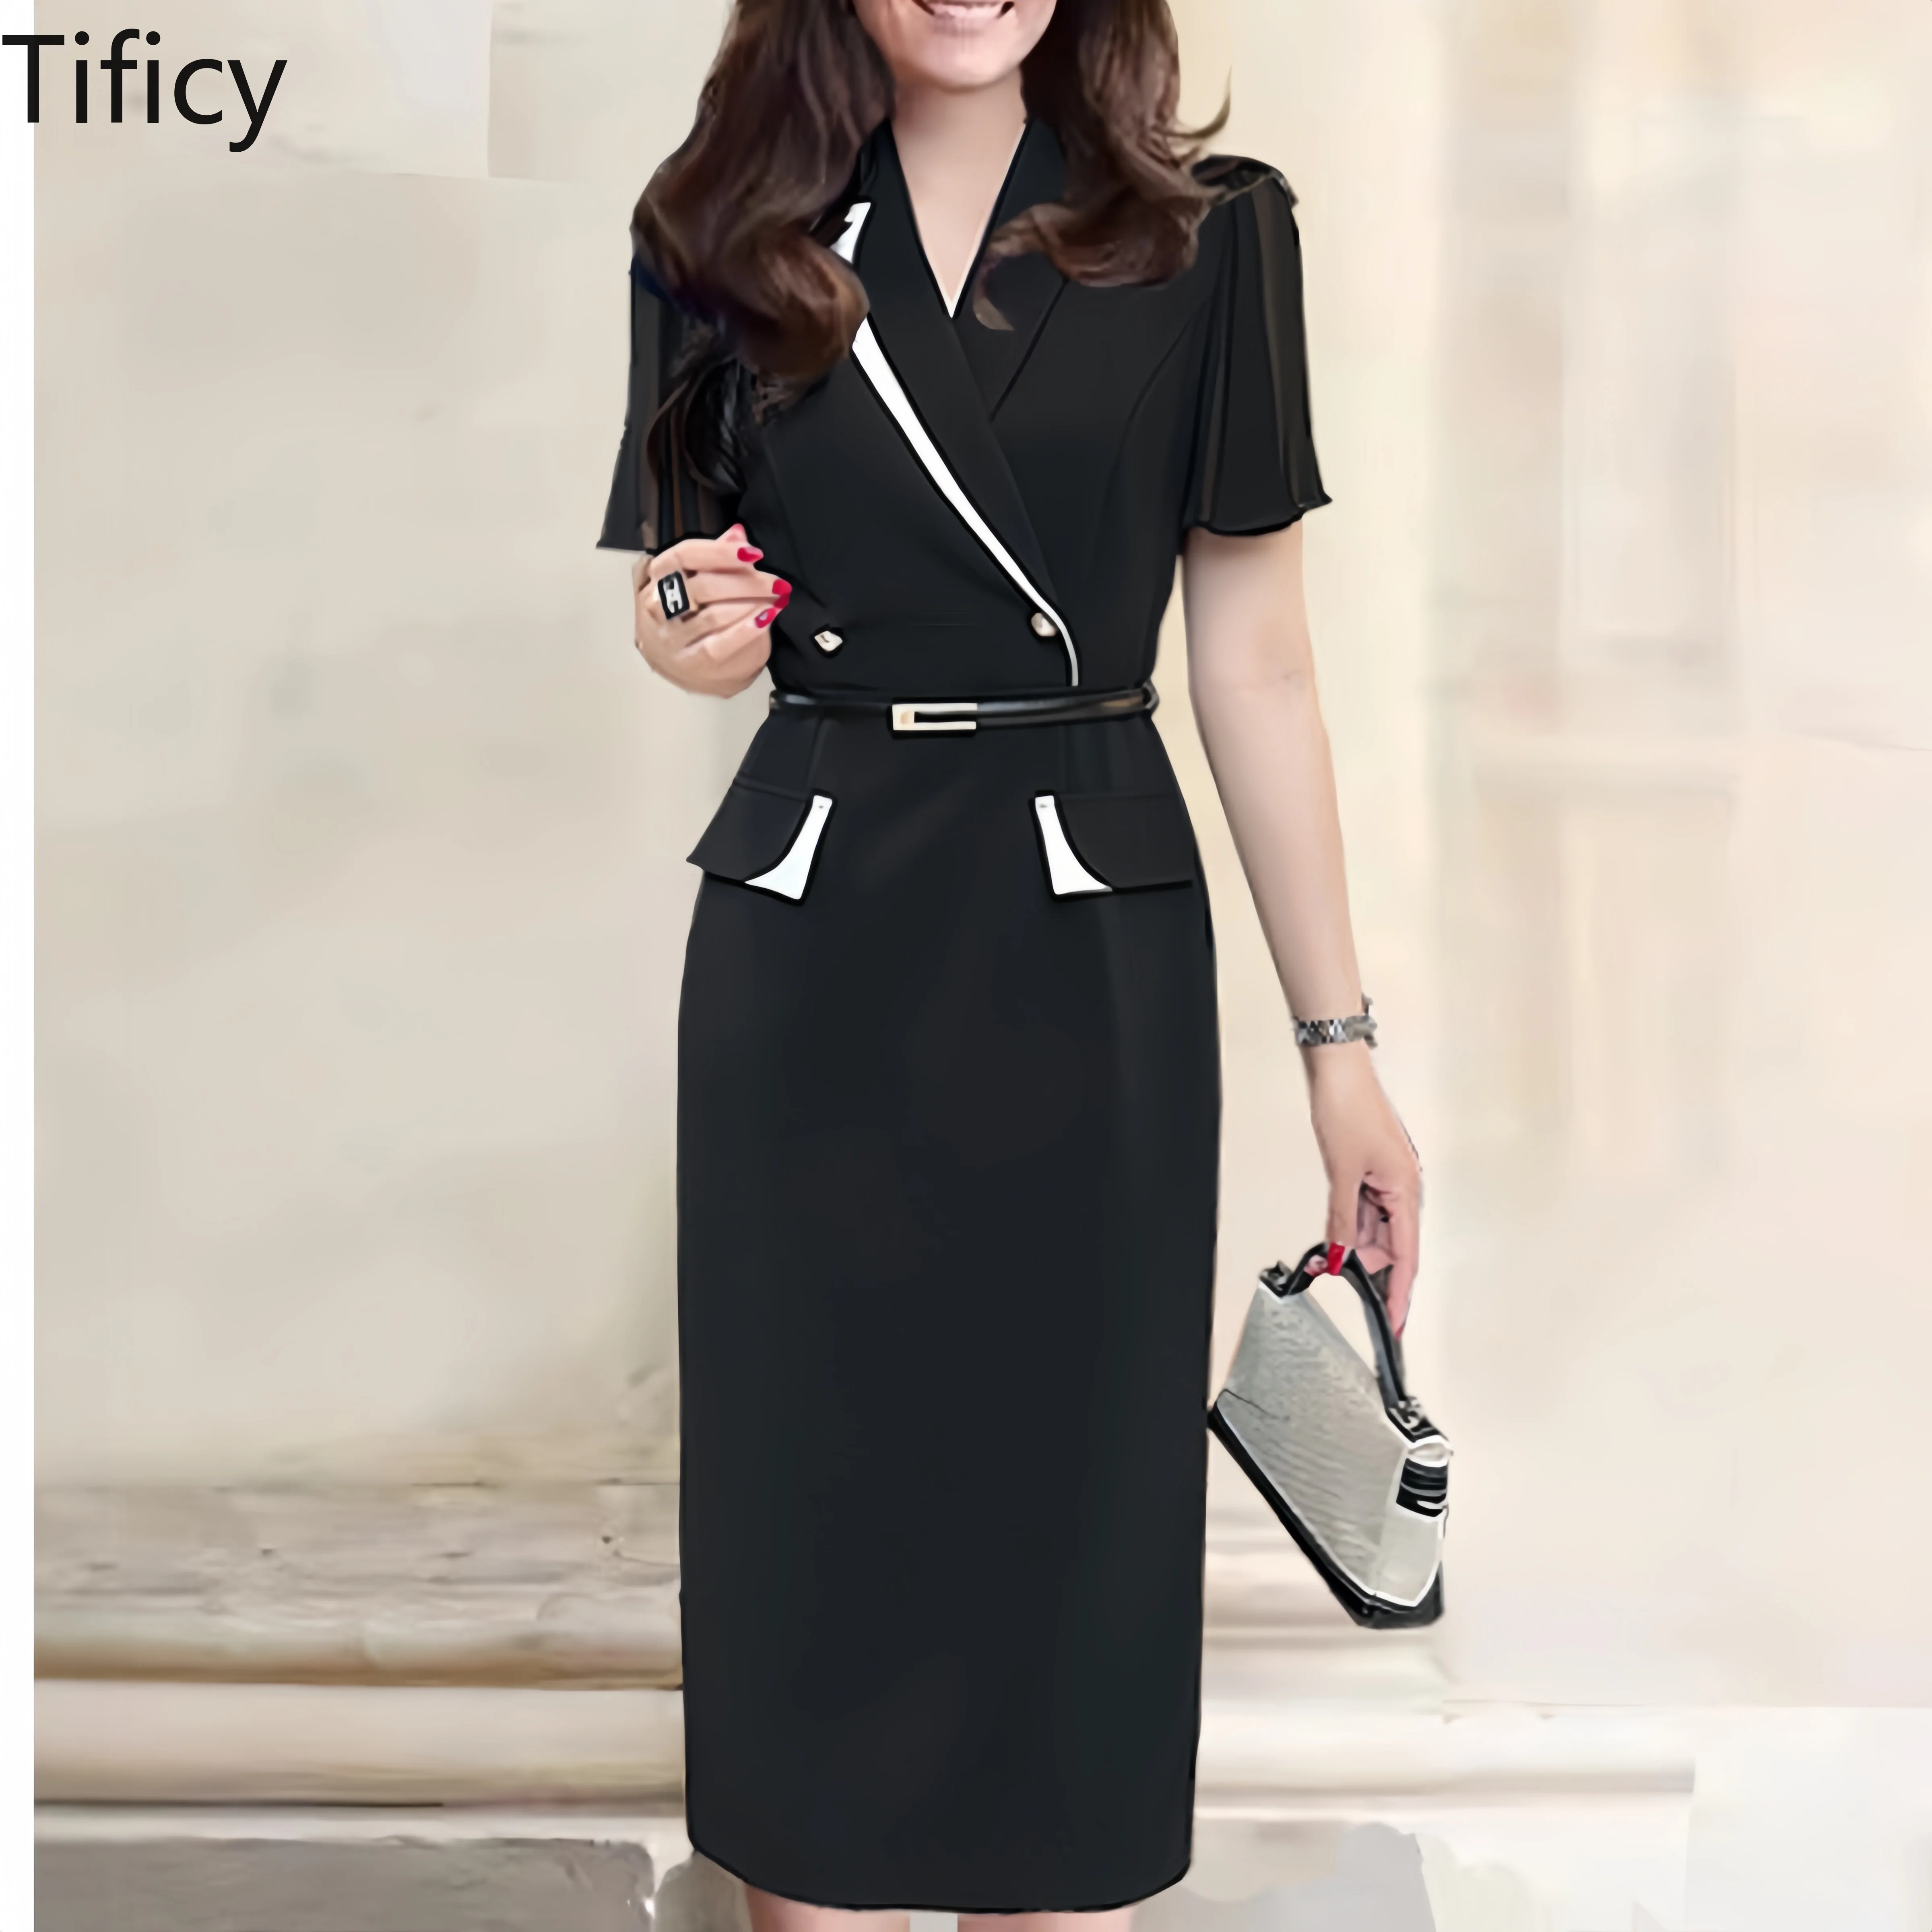 

Kate The Same Style As Spring/summer Women's Suit Collar Short Sleeves Contrasting Color Commuting Professional Slim Ol Dress